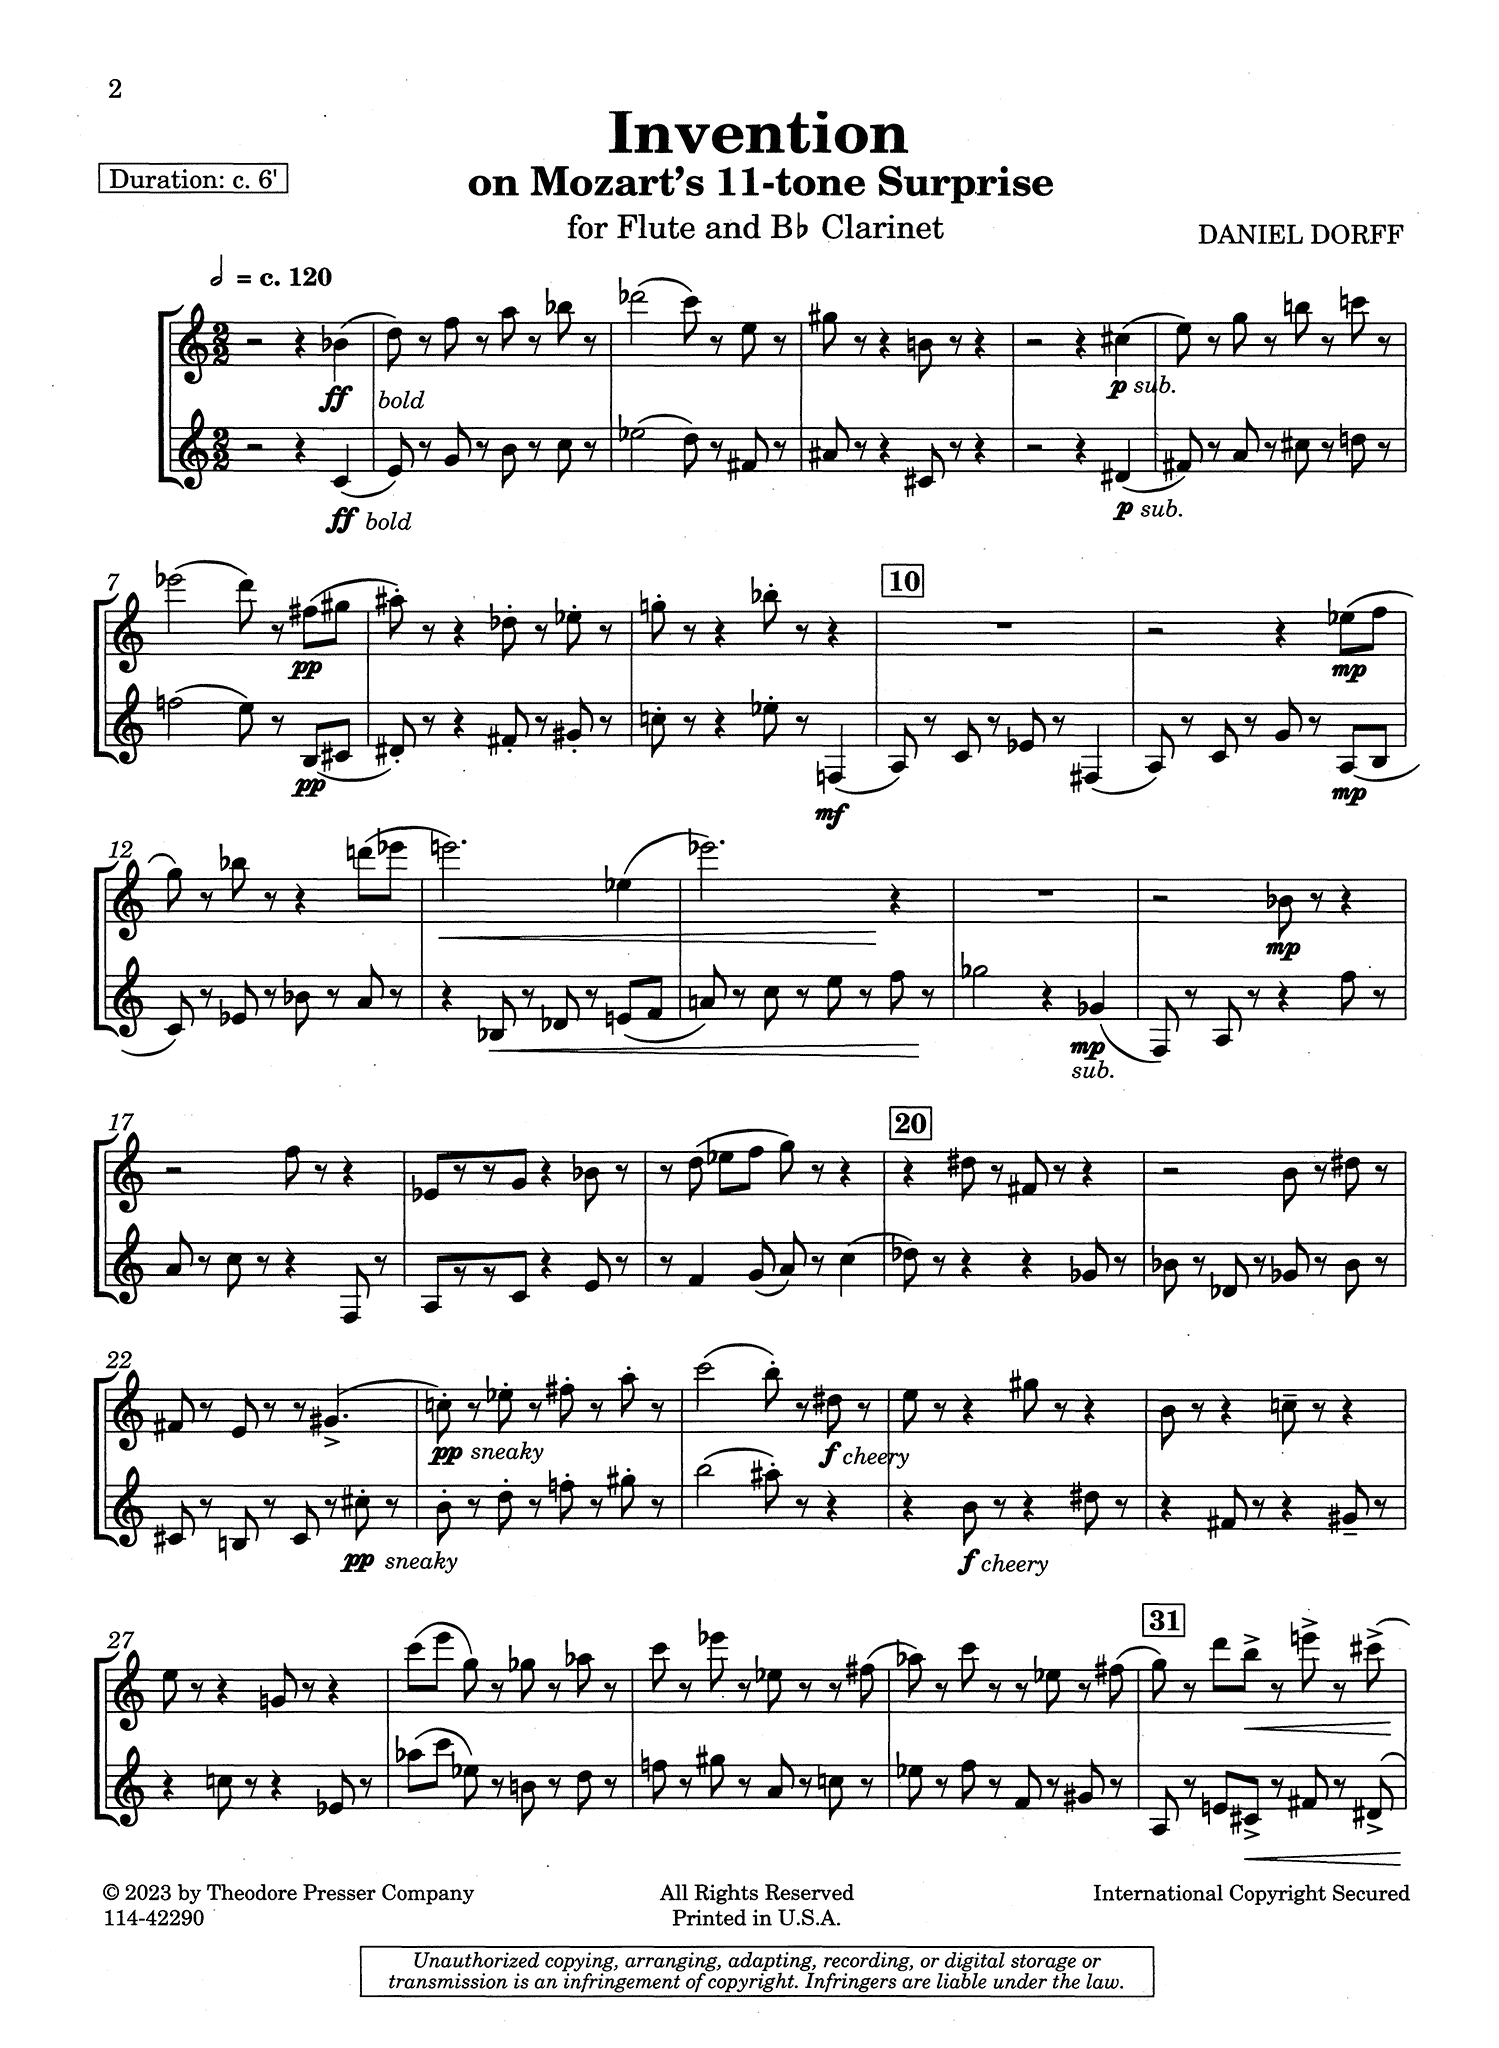 Daniel Dorff Invention on Mozart’s 11-tone Surprise flute and clarinet duet page 1